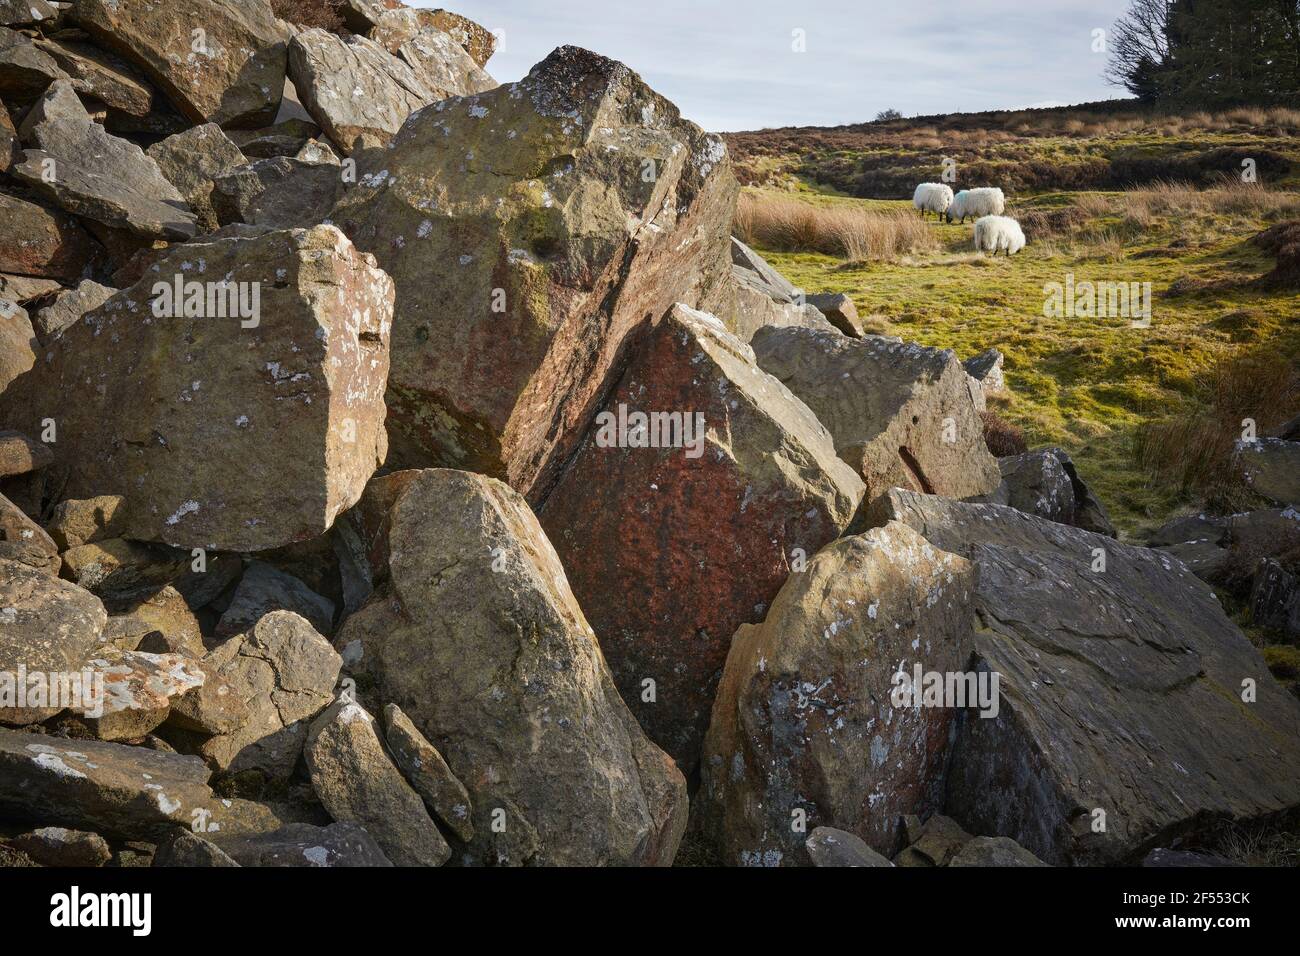 In Yorkshire, moorland sheep graze by the unfenced disused quarry Stock Photo